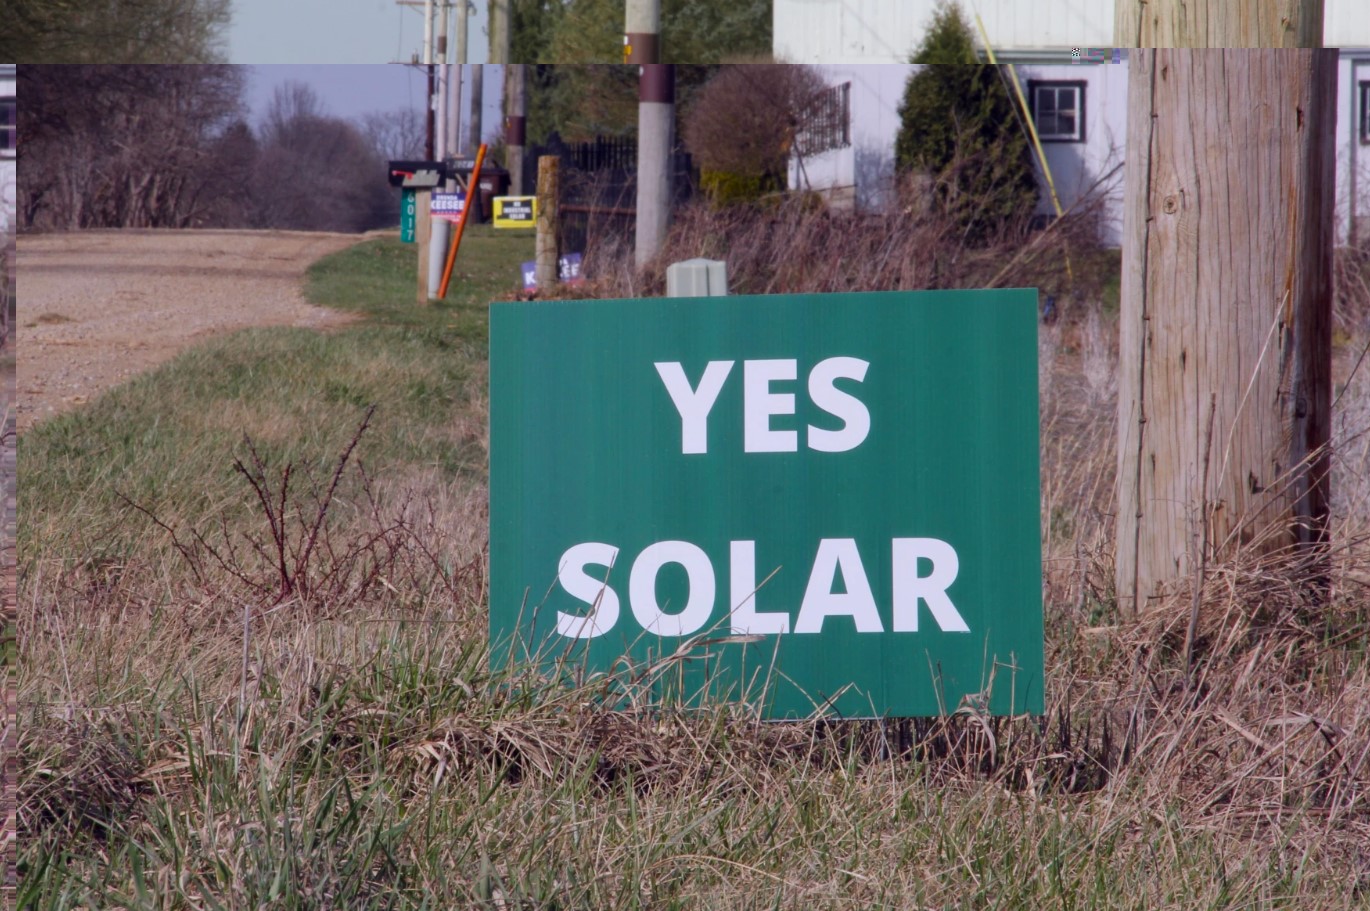 A green sign yard sign with the words "Yes Solar" on a rural road in Knox County, Ohio.